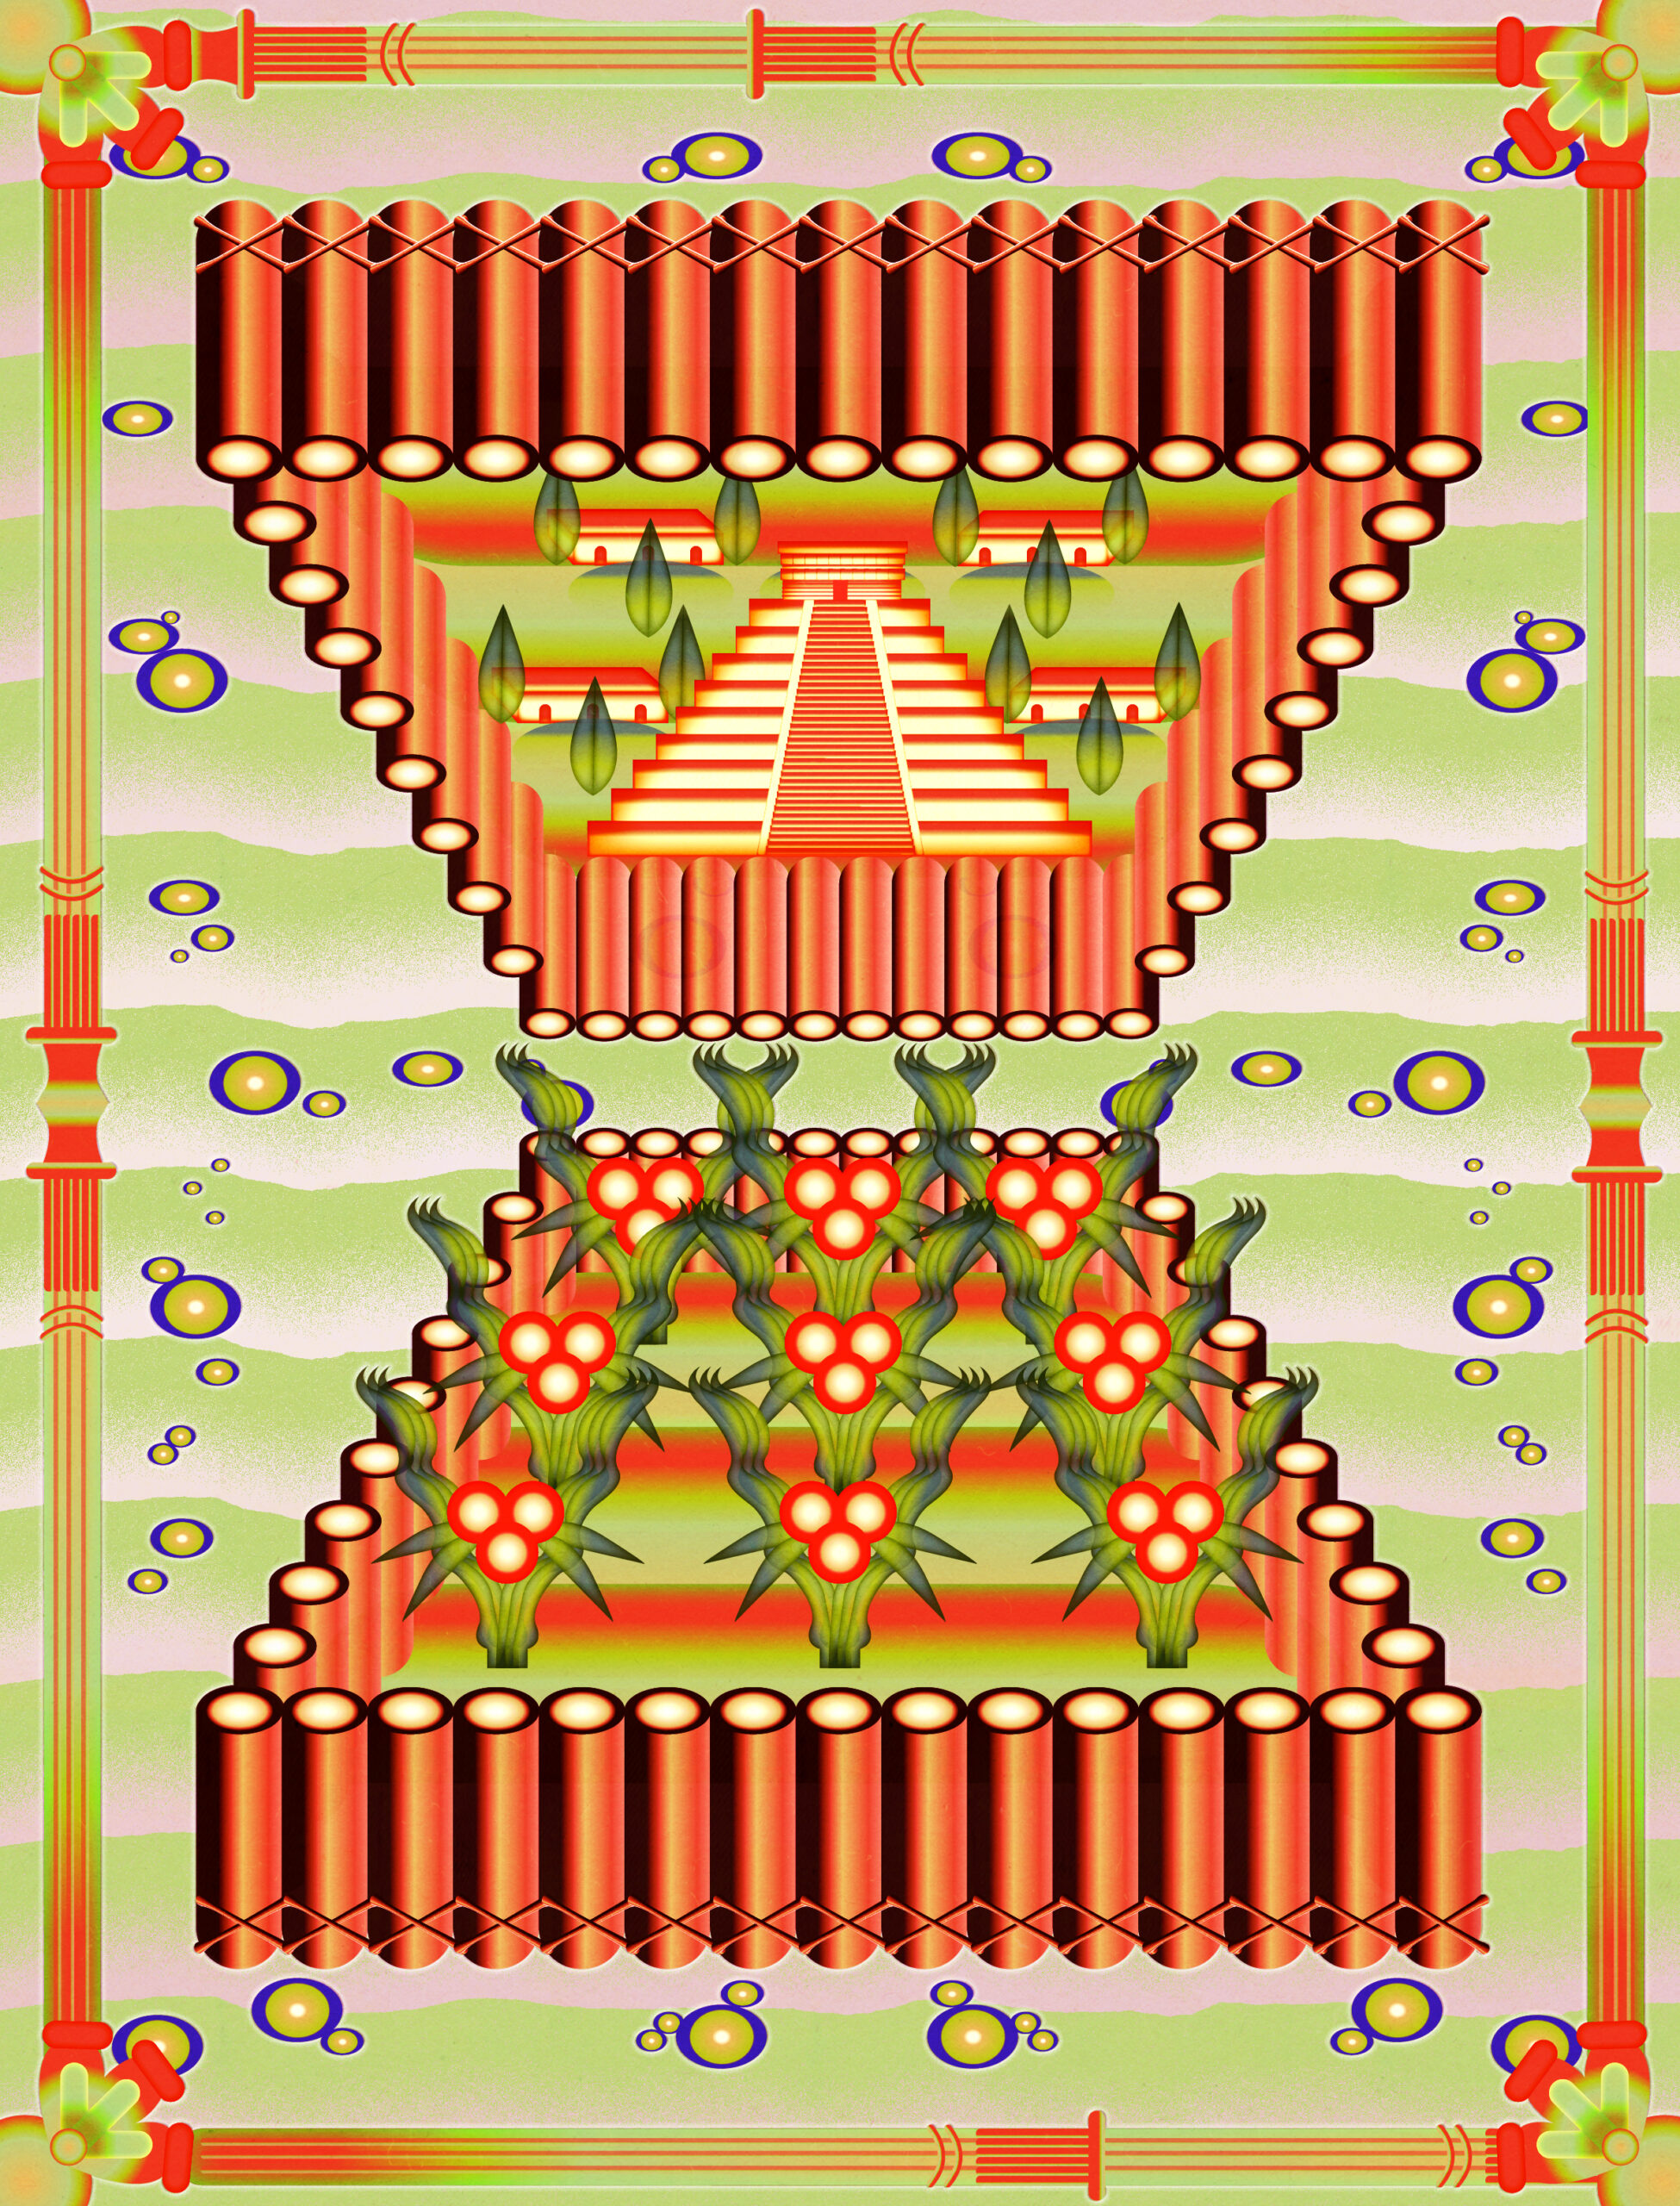 An illustration of an aztec garden structure, with an aztec pyramid at the top and a field of corn at the bottom.